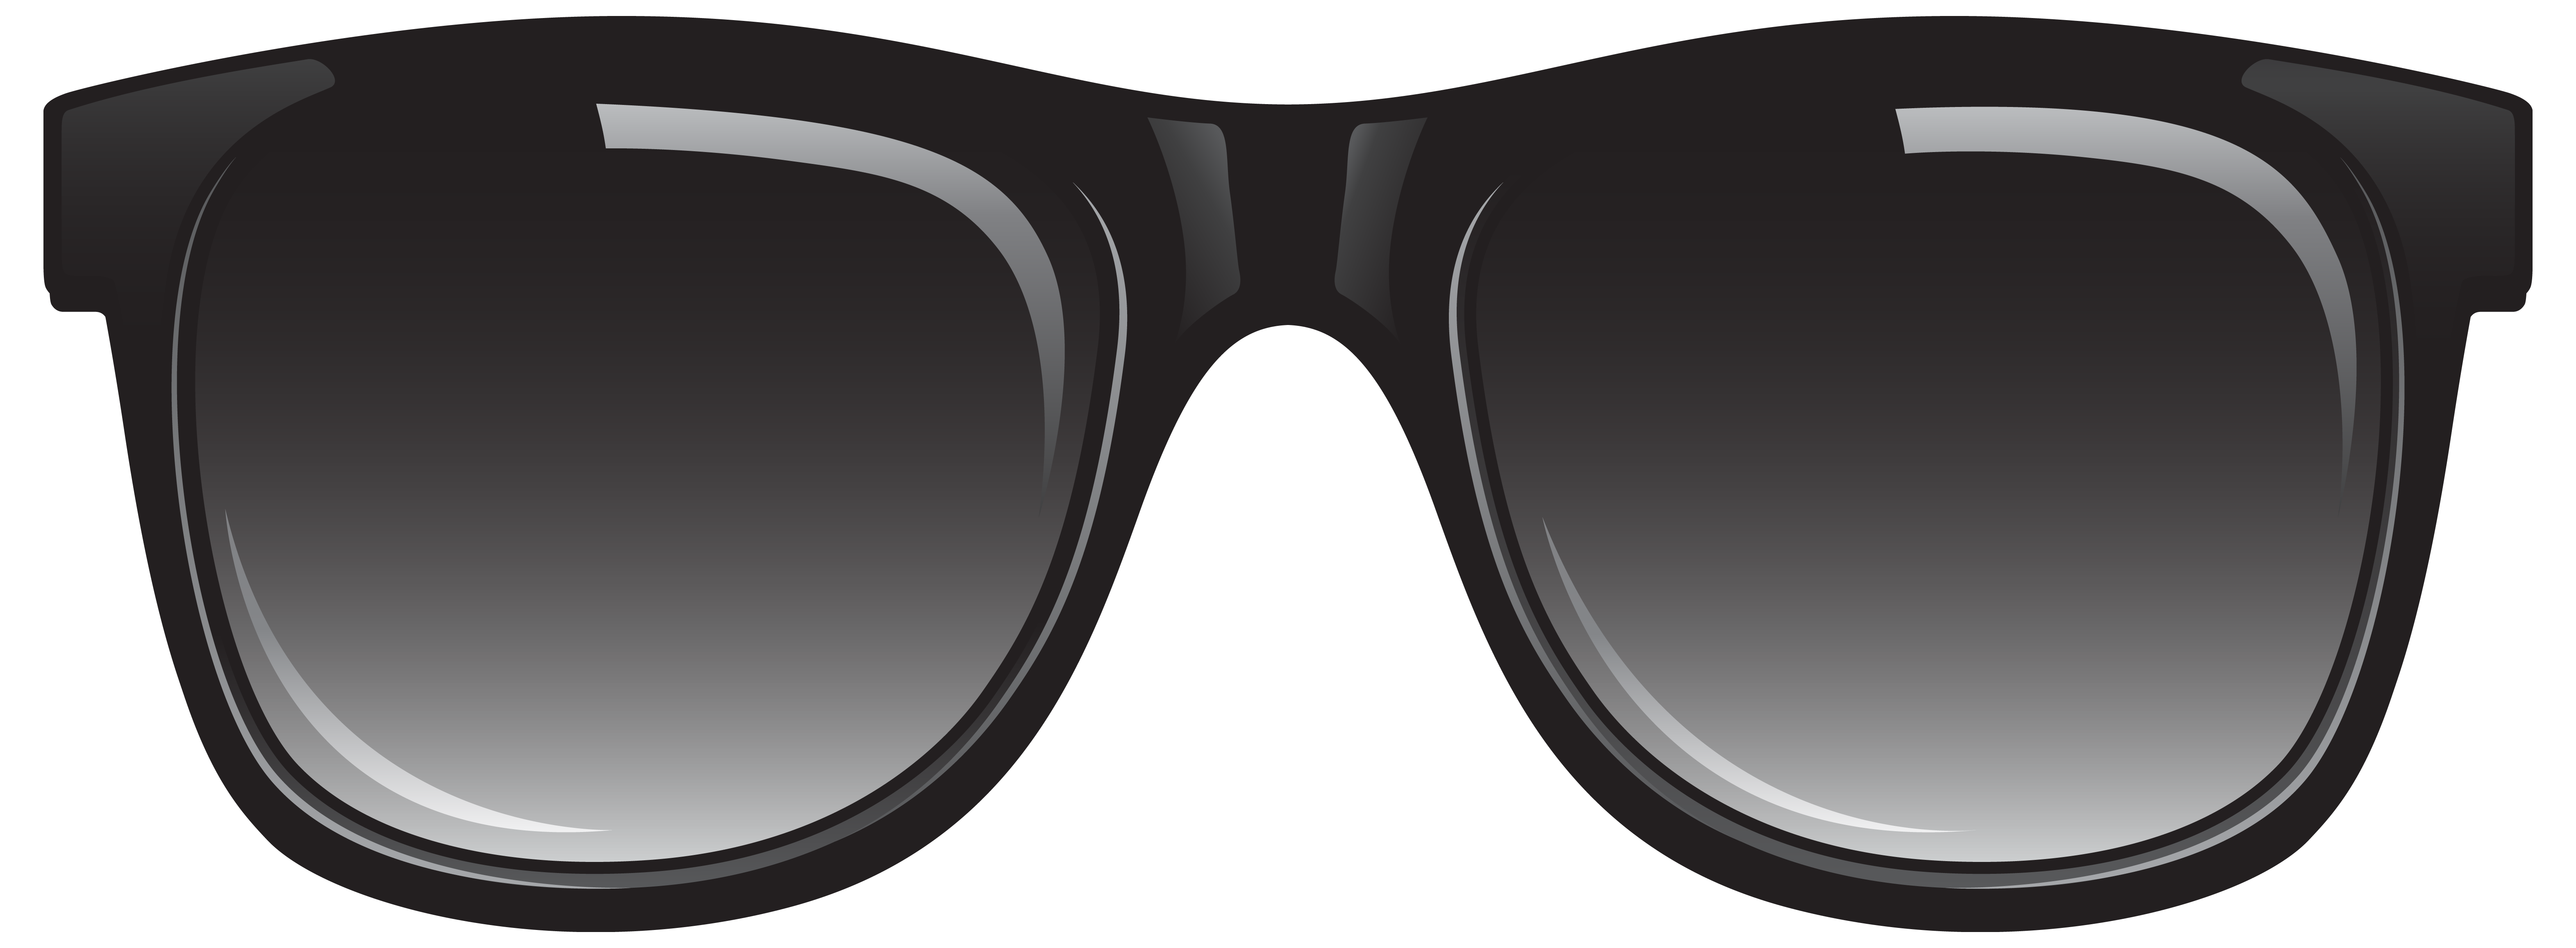 Black Sunglasses PNG Clipart Image | Gallery Yopriceville - High-Quality  Images and Transparent